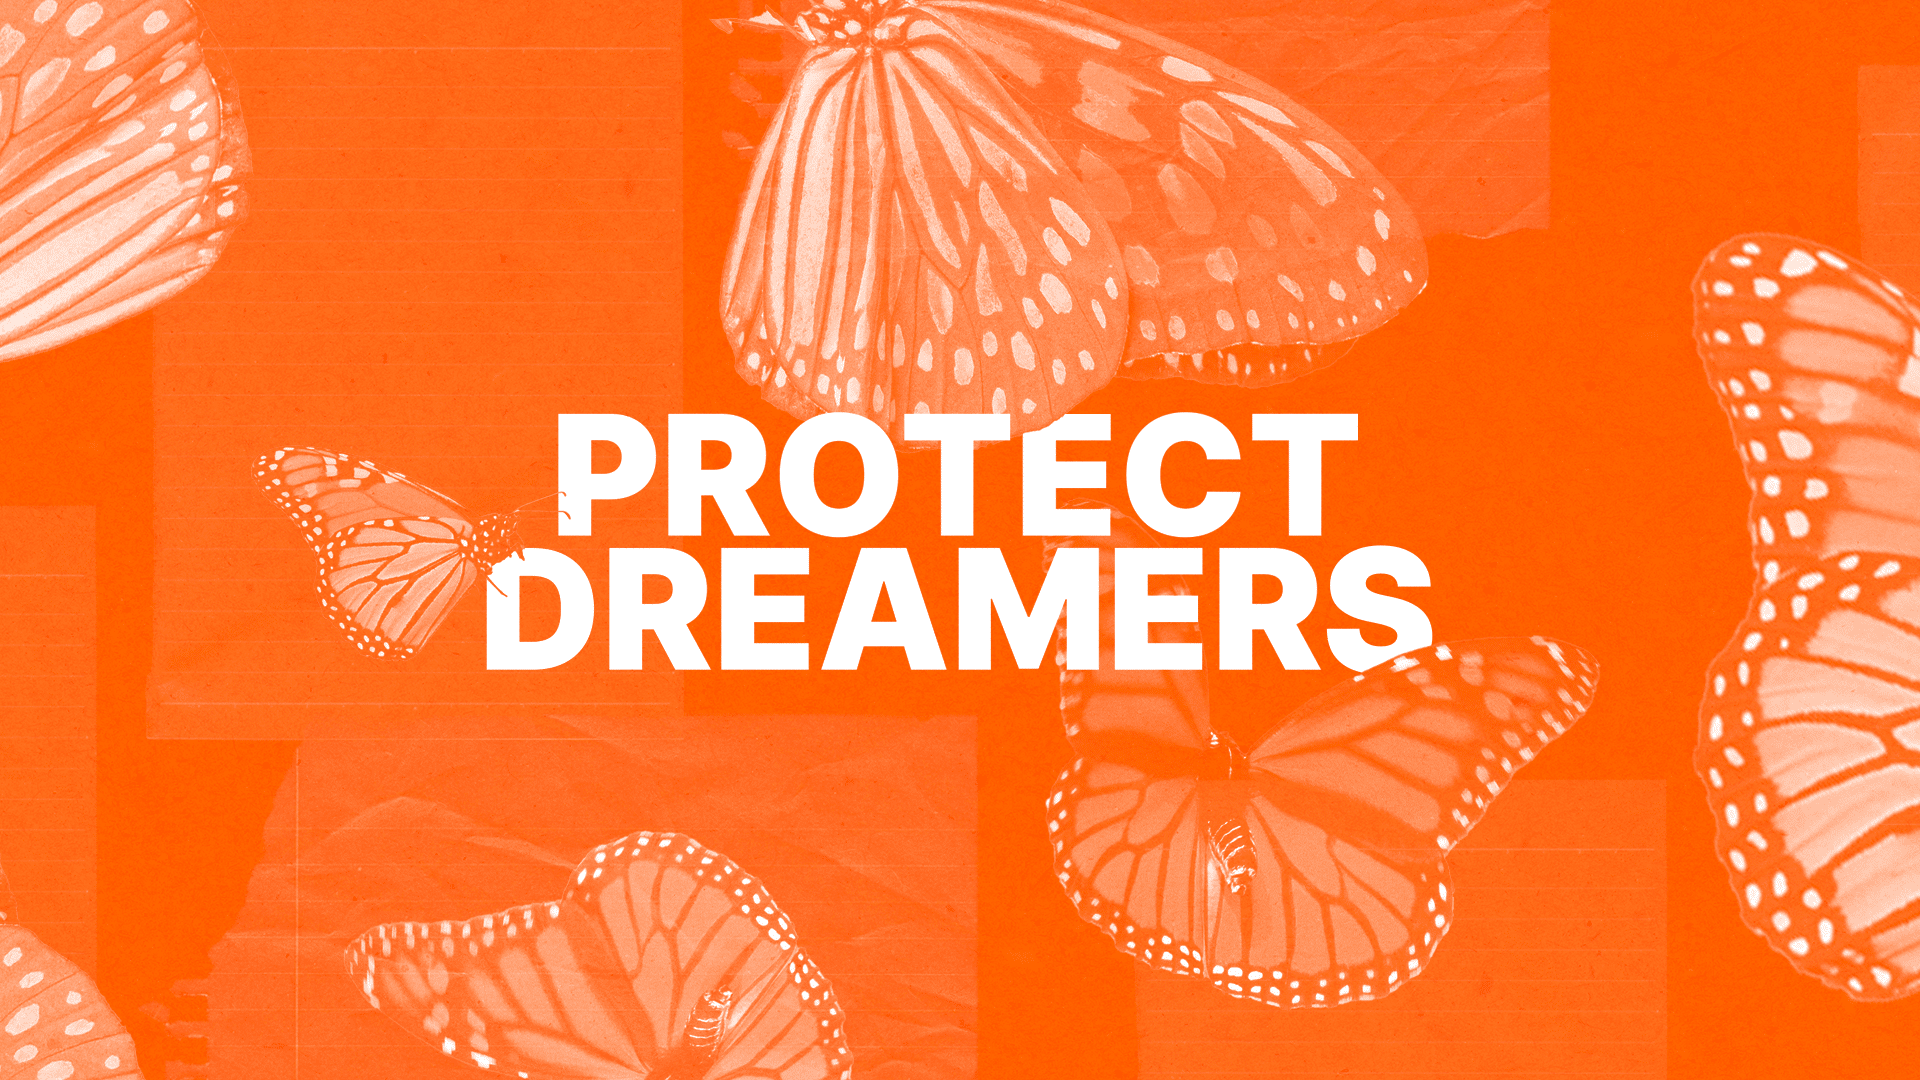 Butterfly collage surround text reading "protect dreamers"